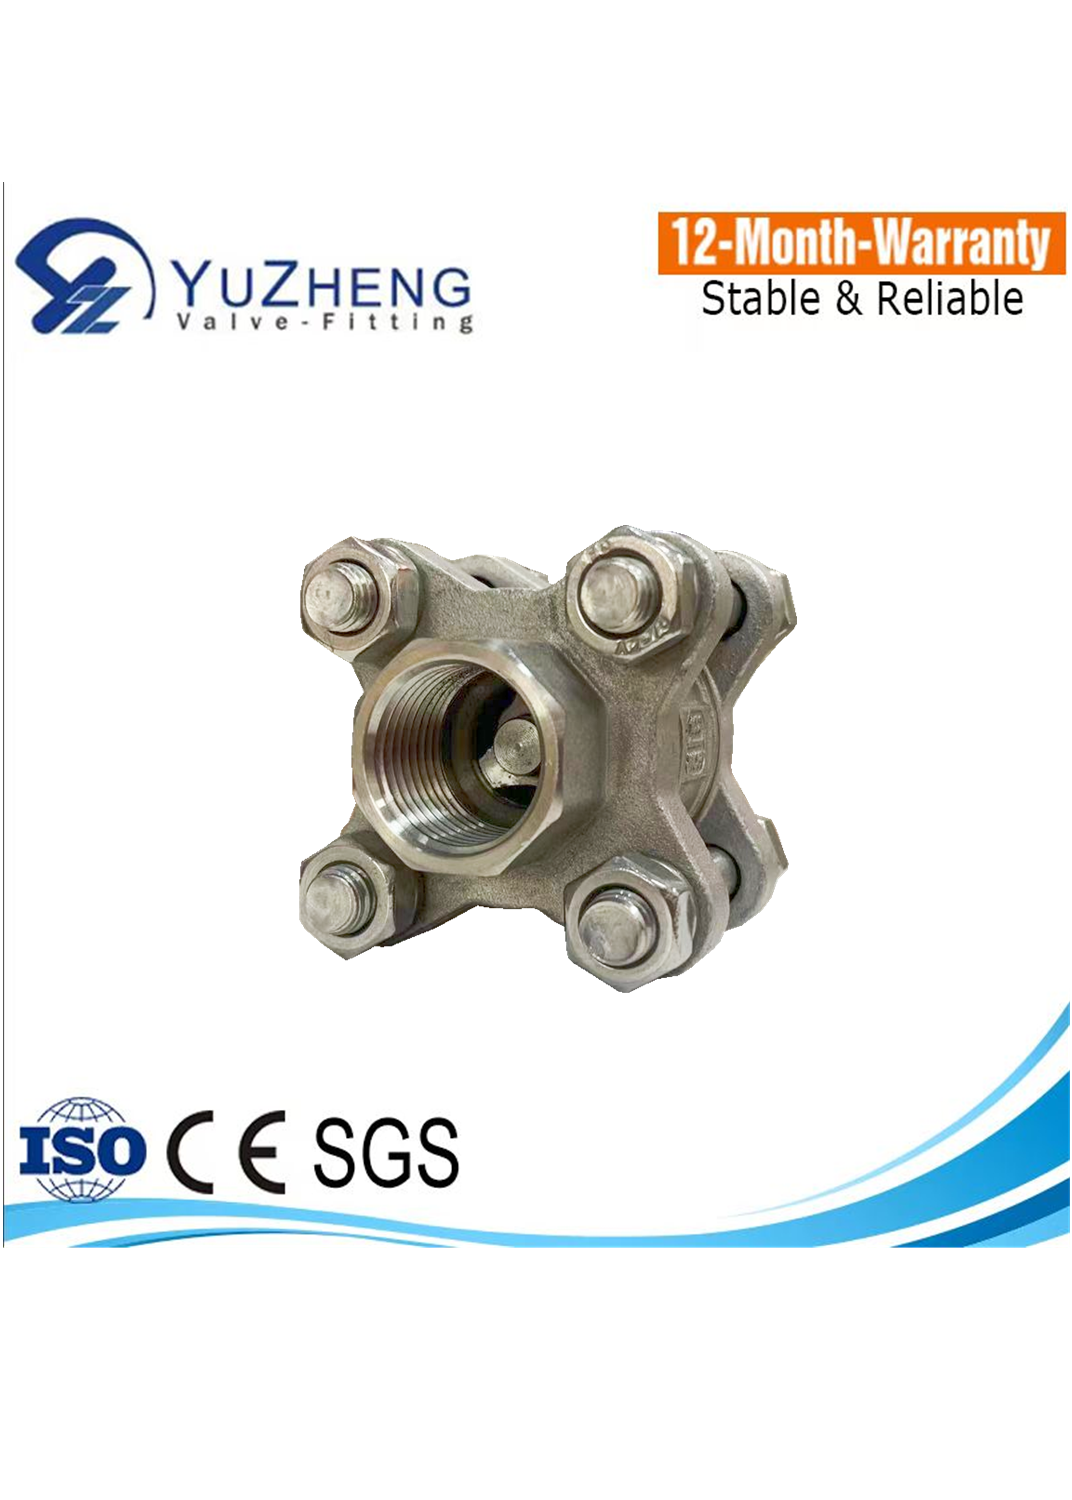 Stainess Steel 3PC Check Valve